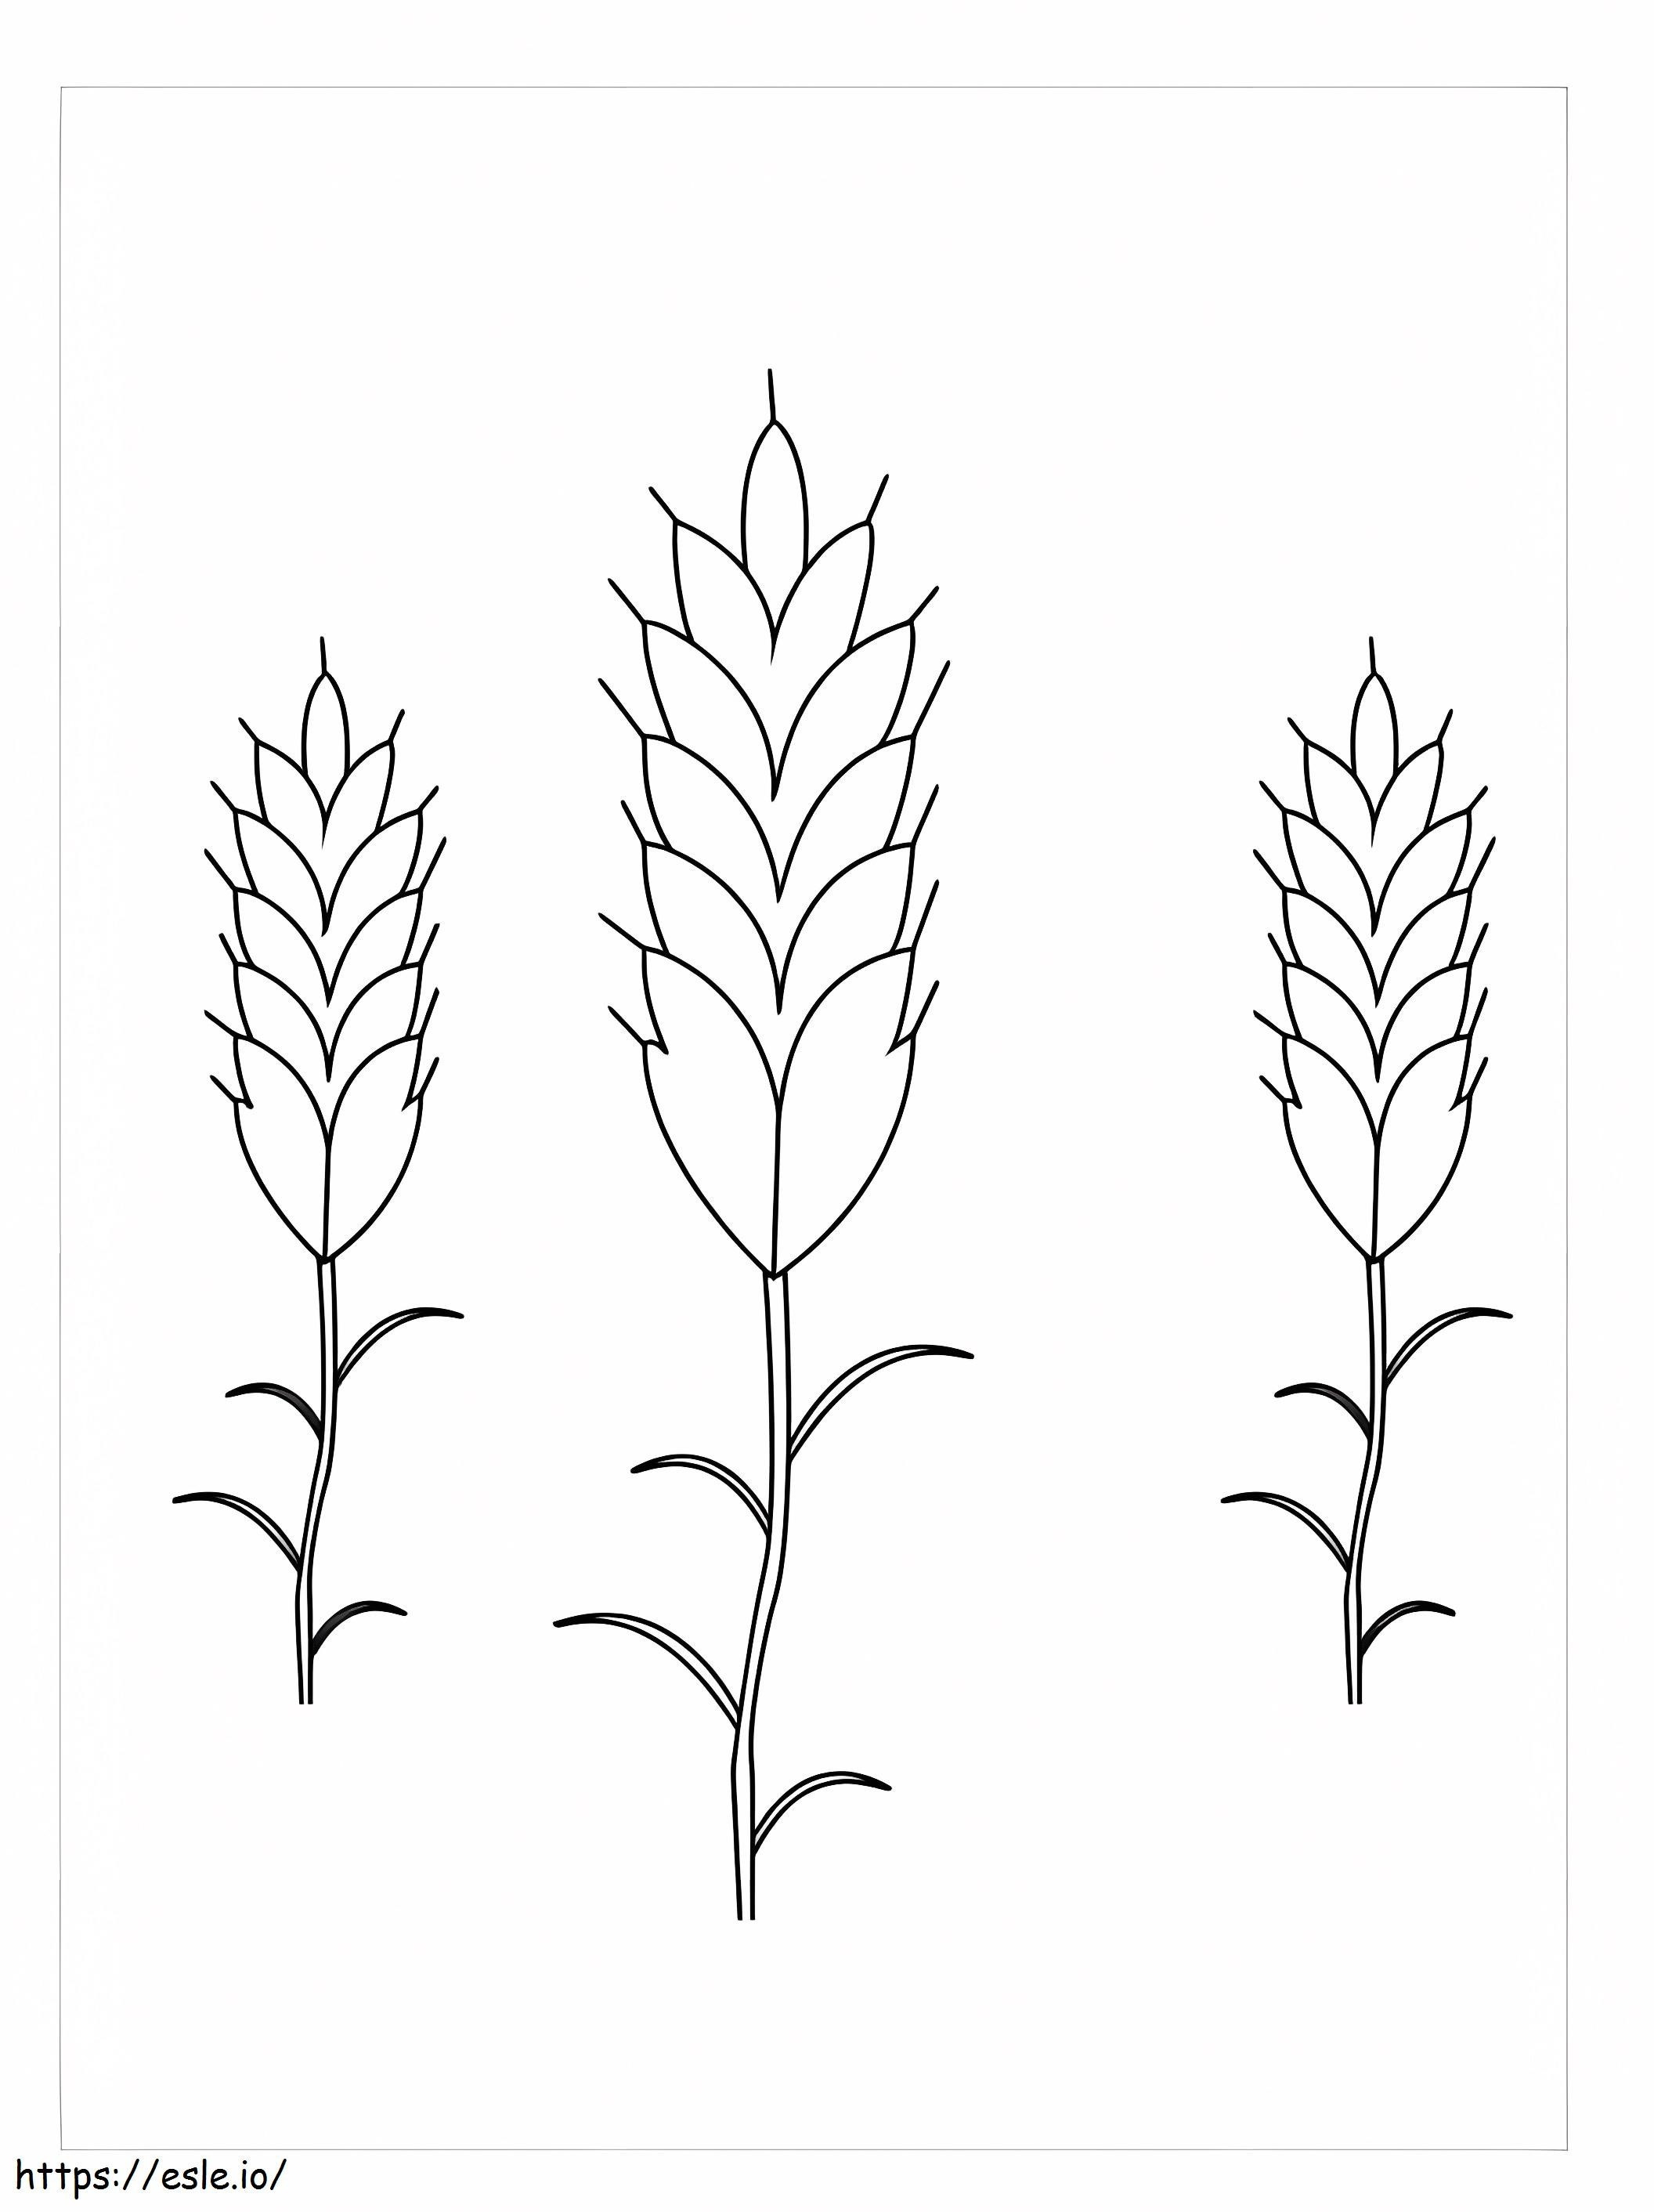 Three Wheat Plants coloring page